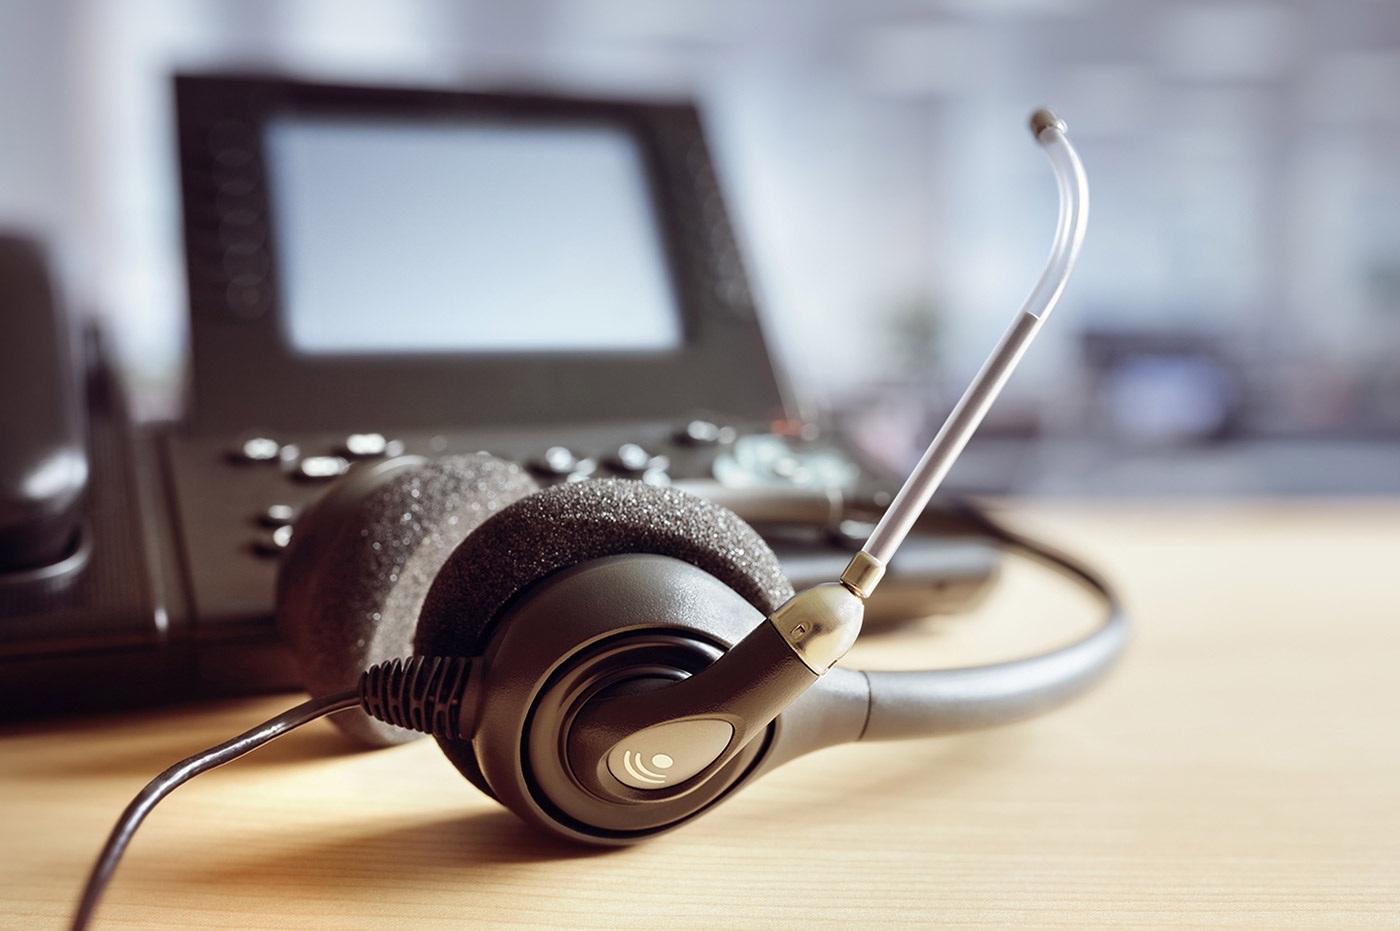 A desk phone with a headset attached.